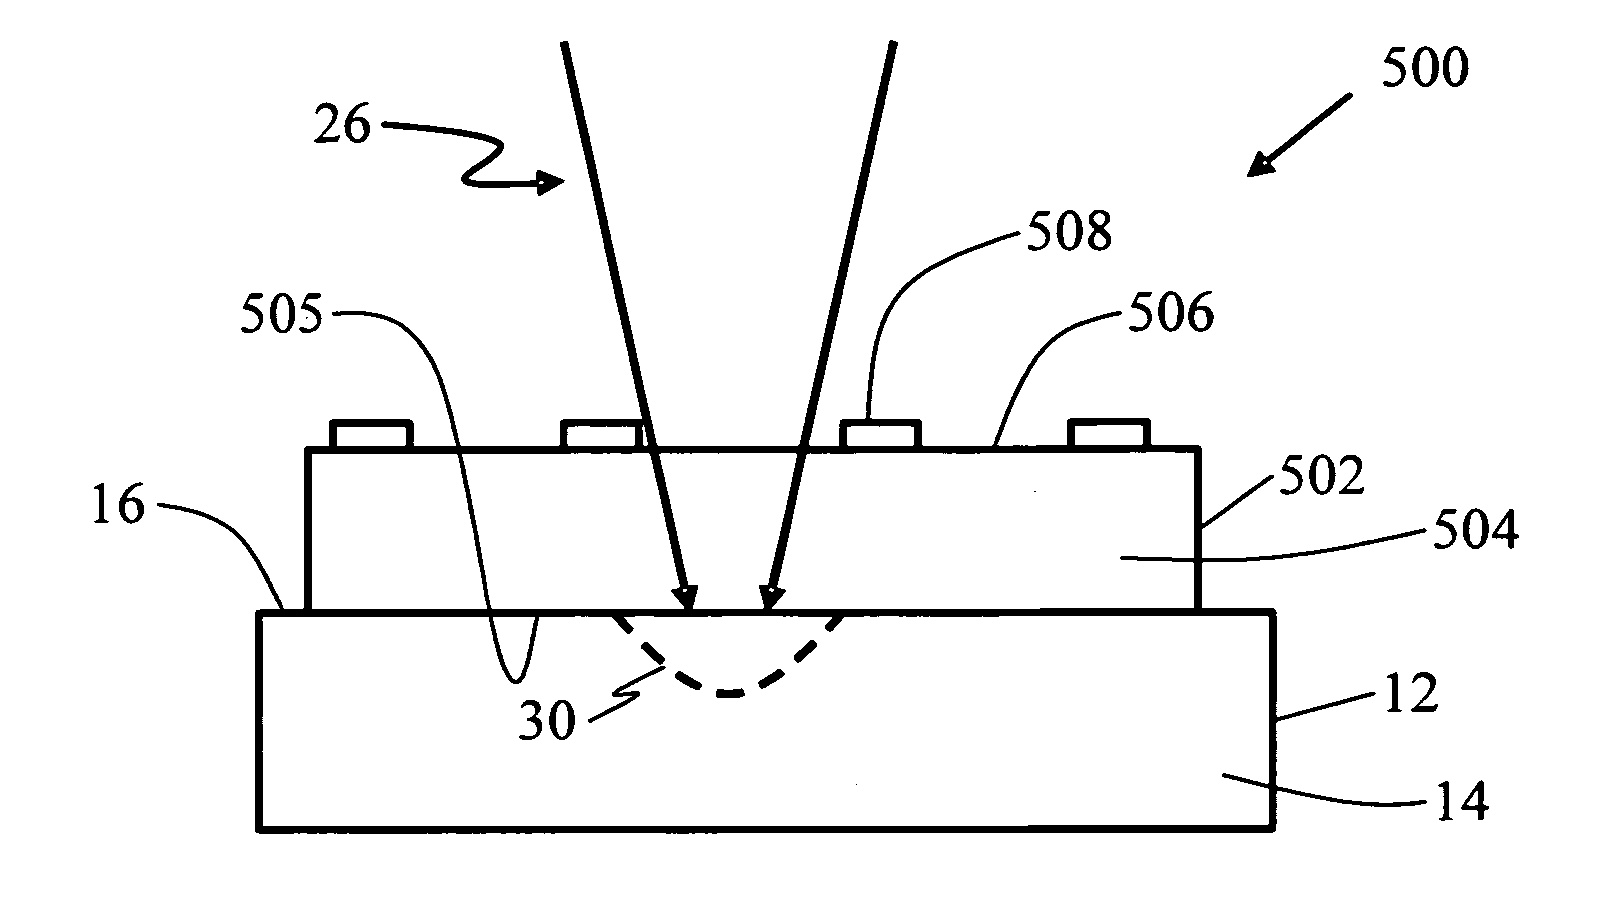 Glass-based micropositioning systems and methods